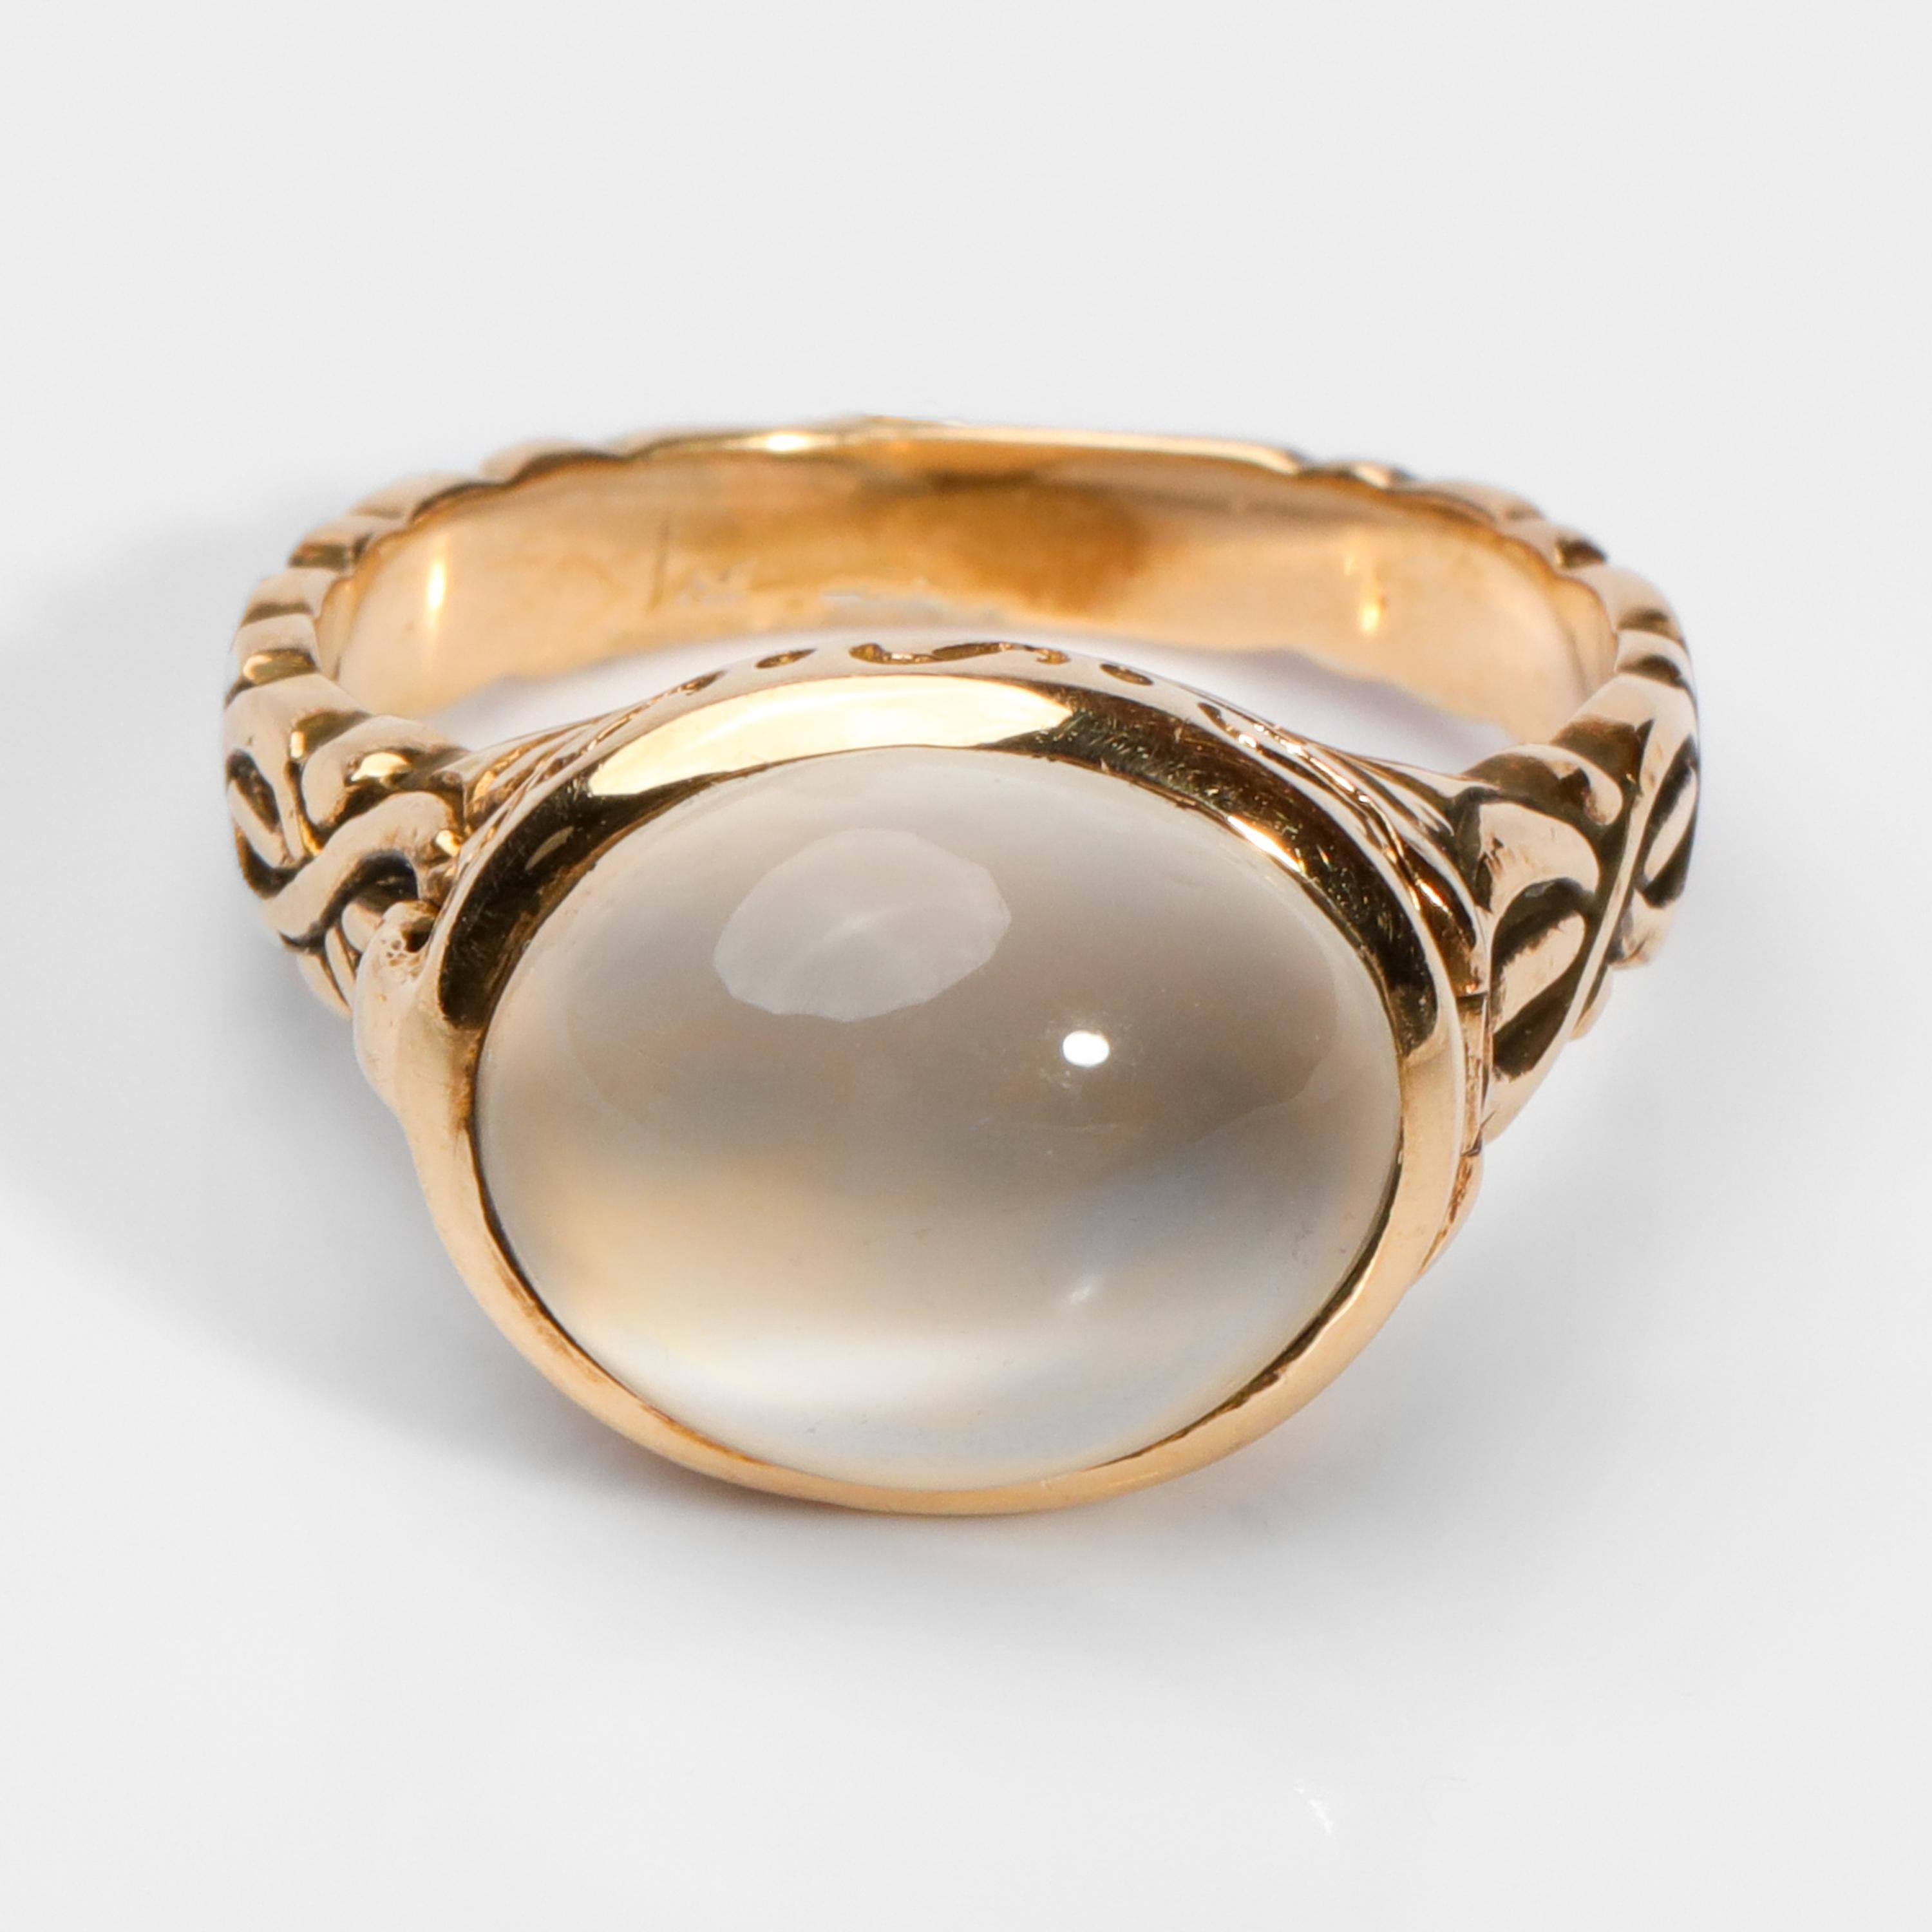 A moon-colored cat's eye moonstone displaying excellent chatoyancy (the sliding of the 